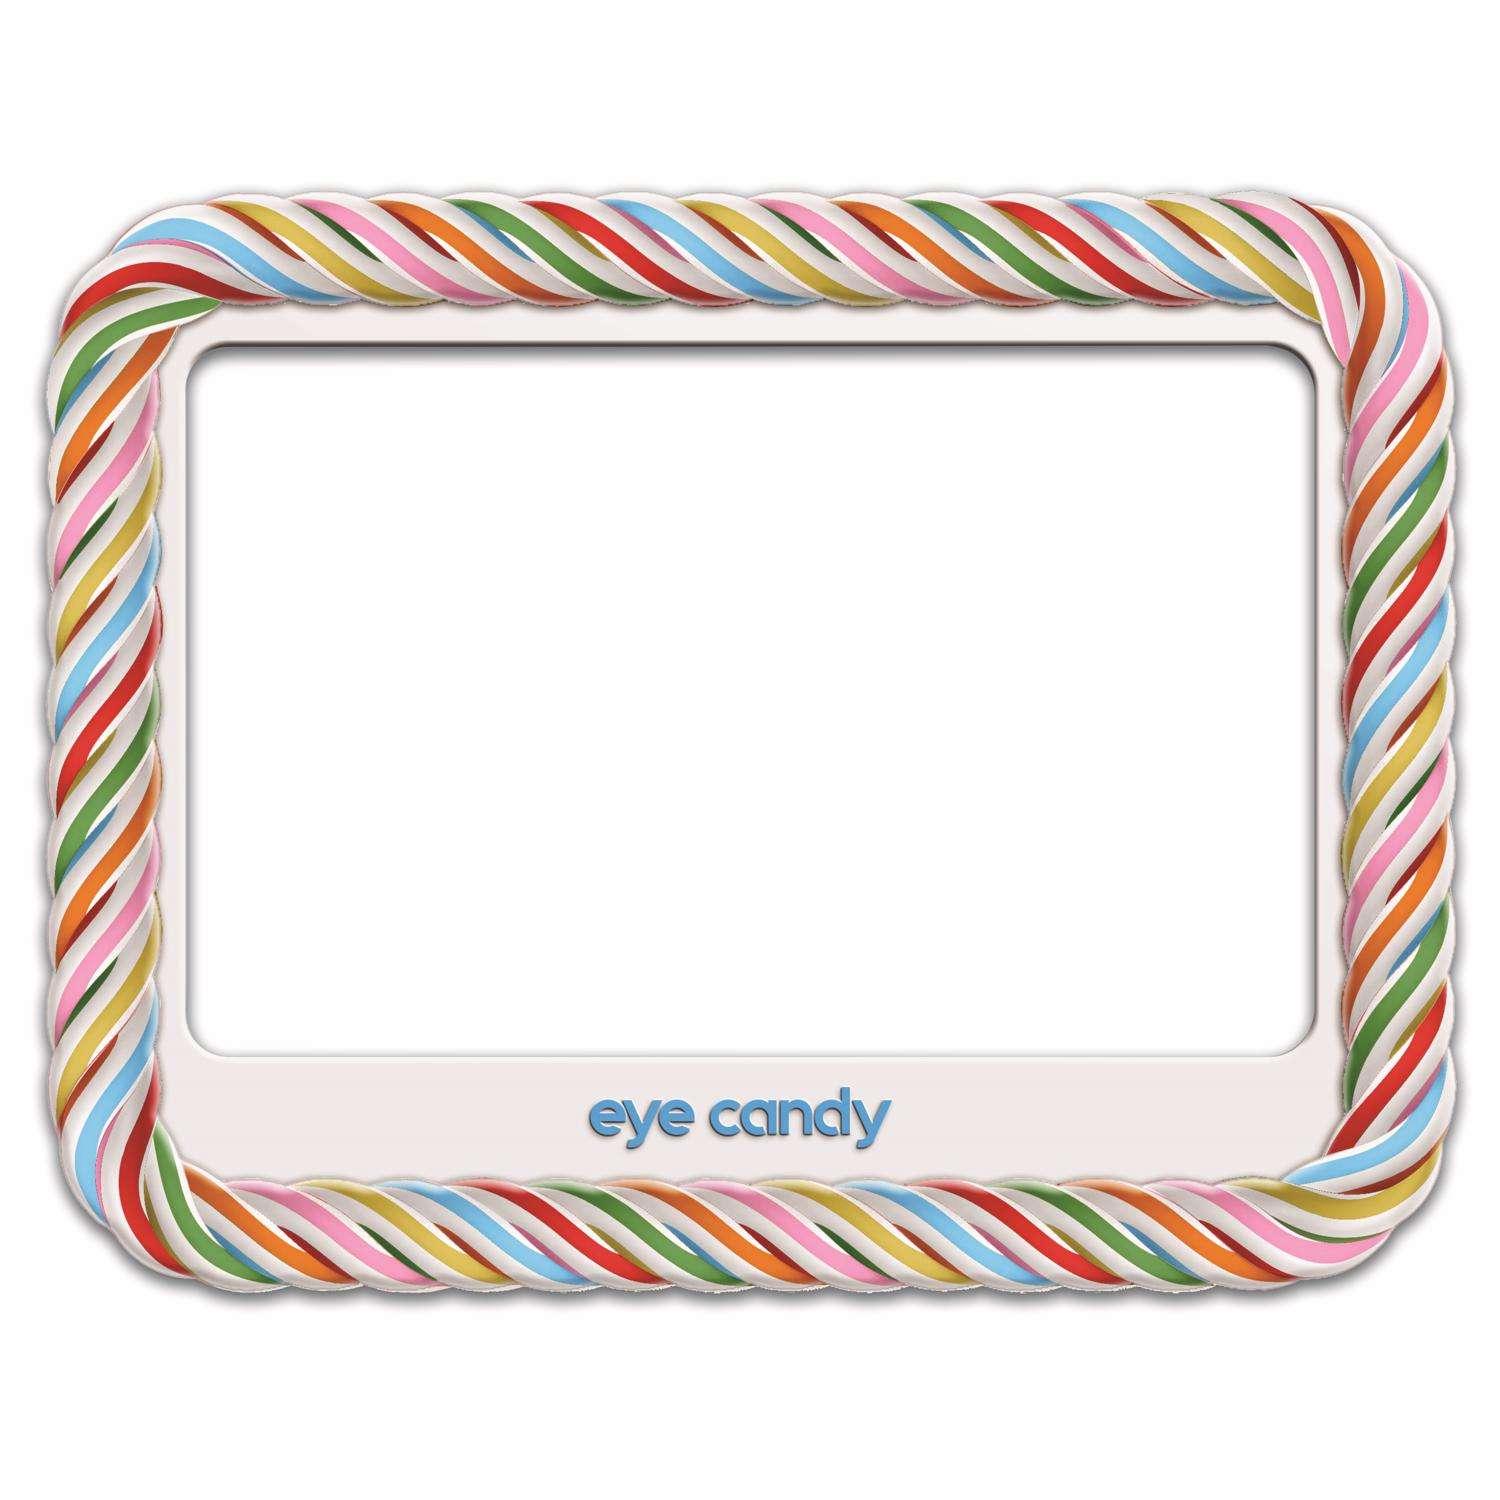 Eye Candy 4 Pack Full-Page Book Magnifier, As Seen on TV, Magnifies Up to 3X, Size: One Size